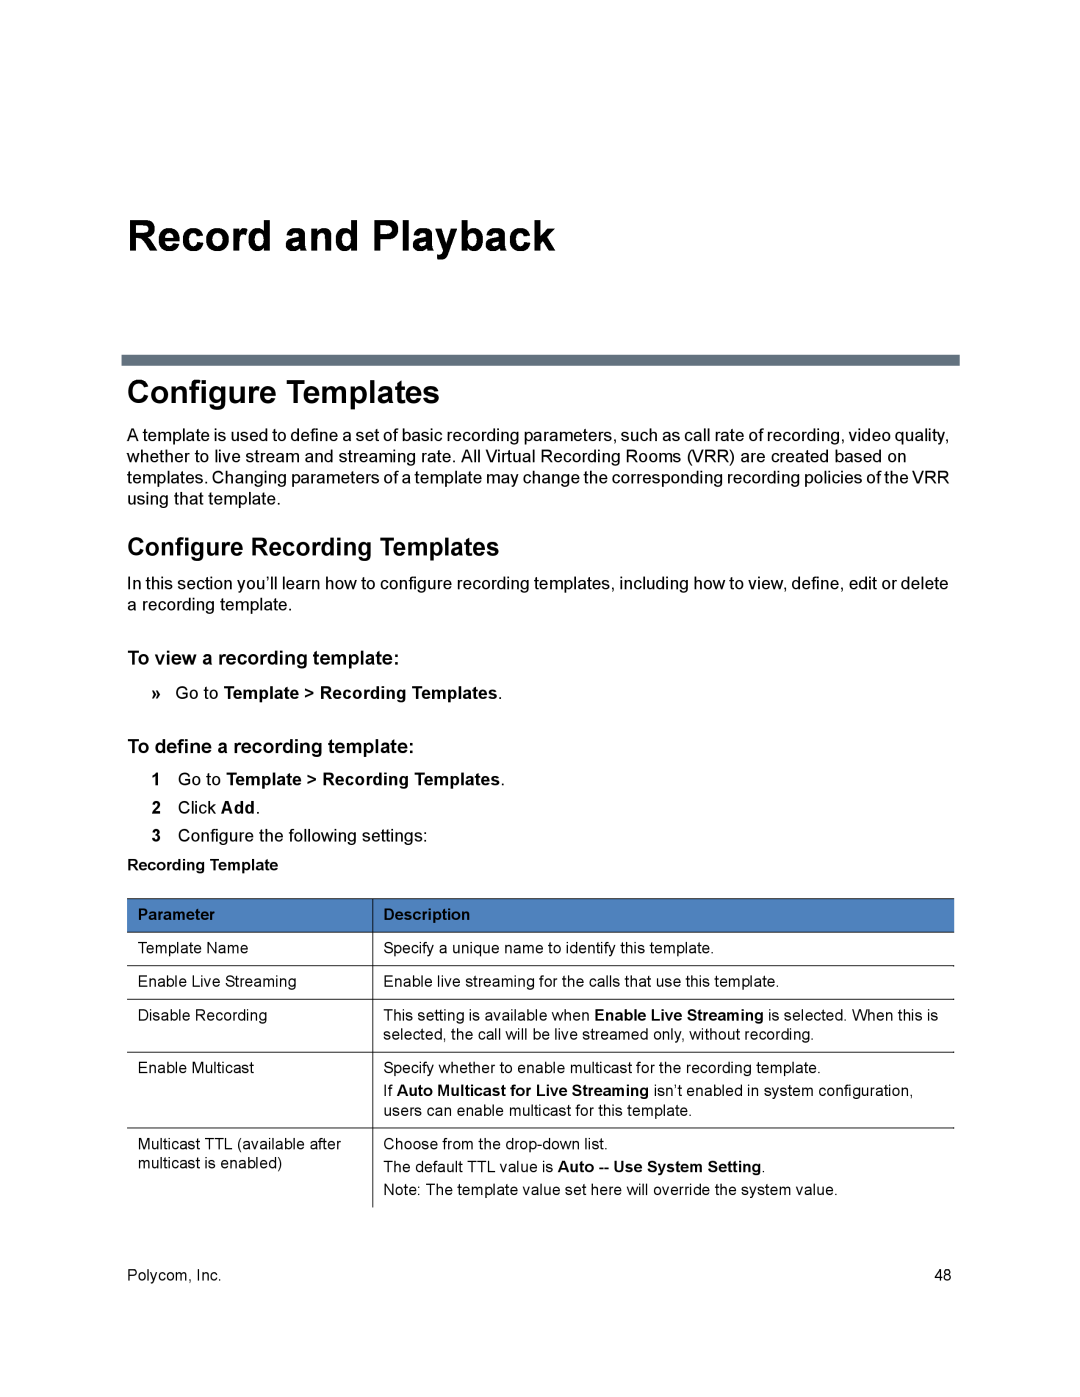 Polycom 40/0 manual Record and Playback, Configure Templates, Configure Recording Templates, To view a recording template 